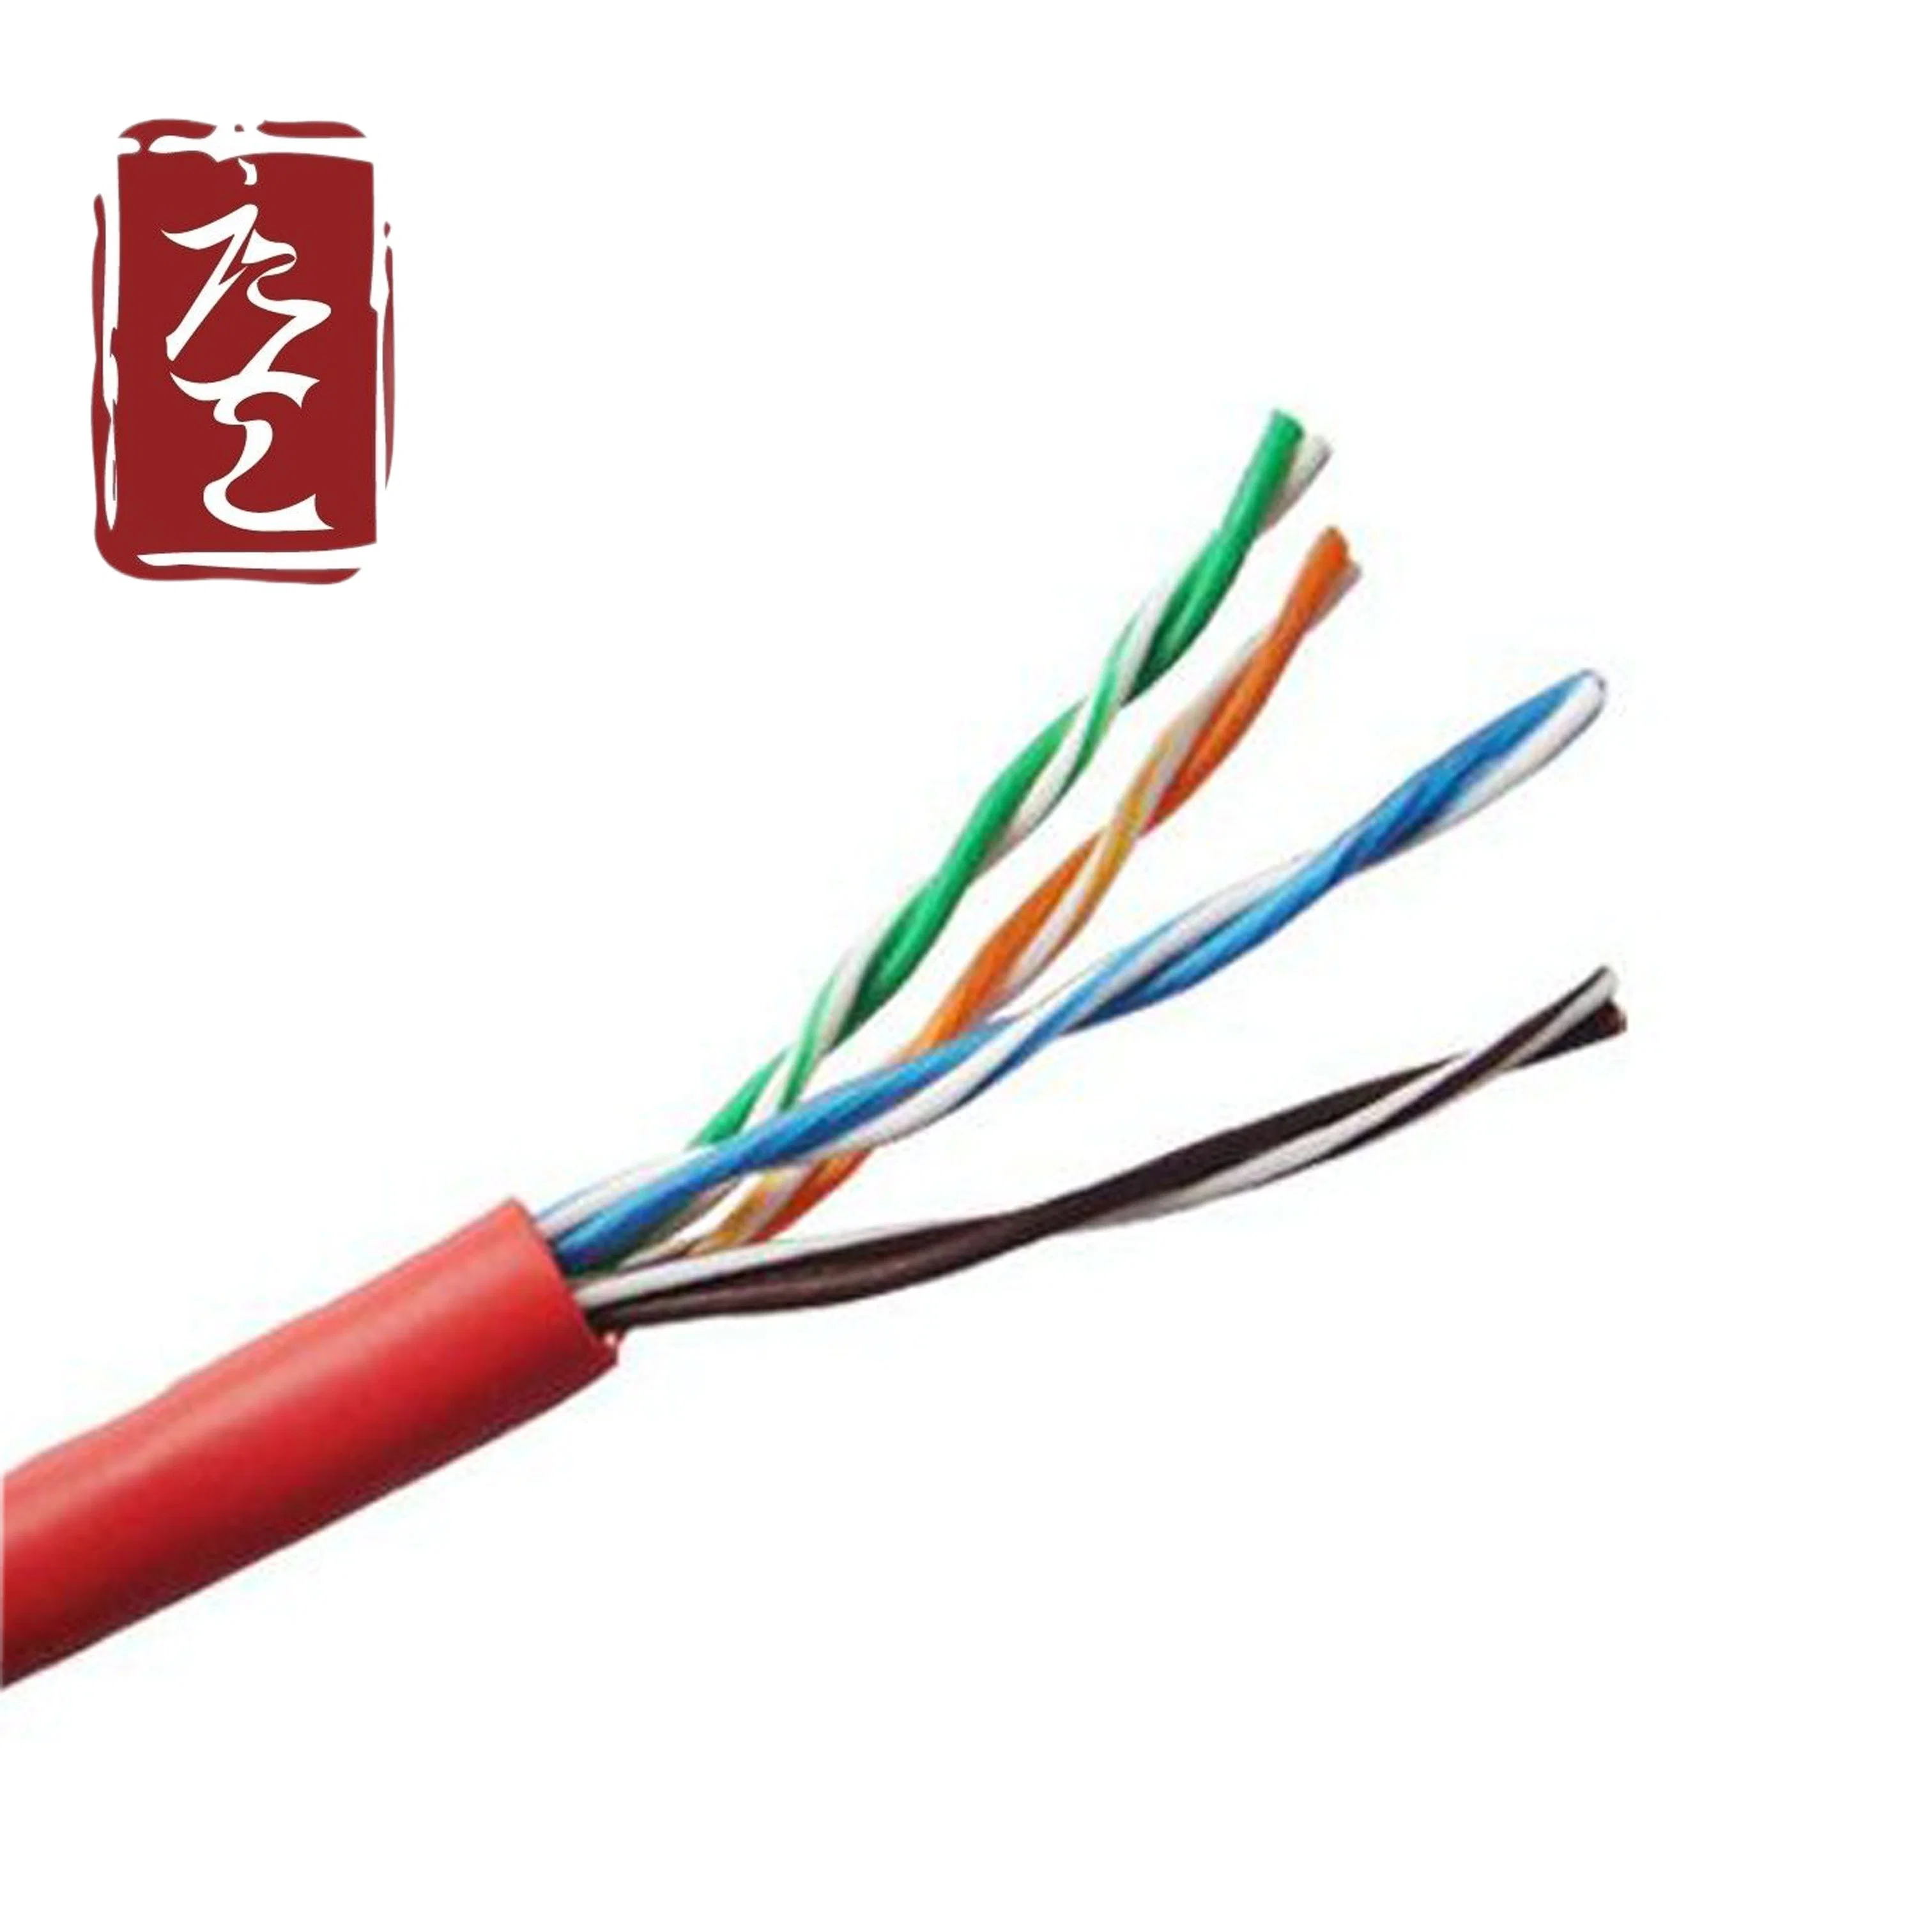 OEM Factory Copper Wire Twisted Pair Cat5e Cat5 Network LAN Cable PVC